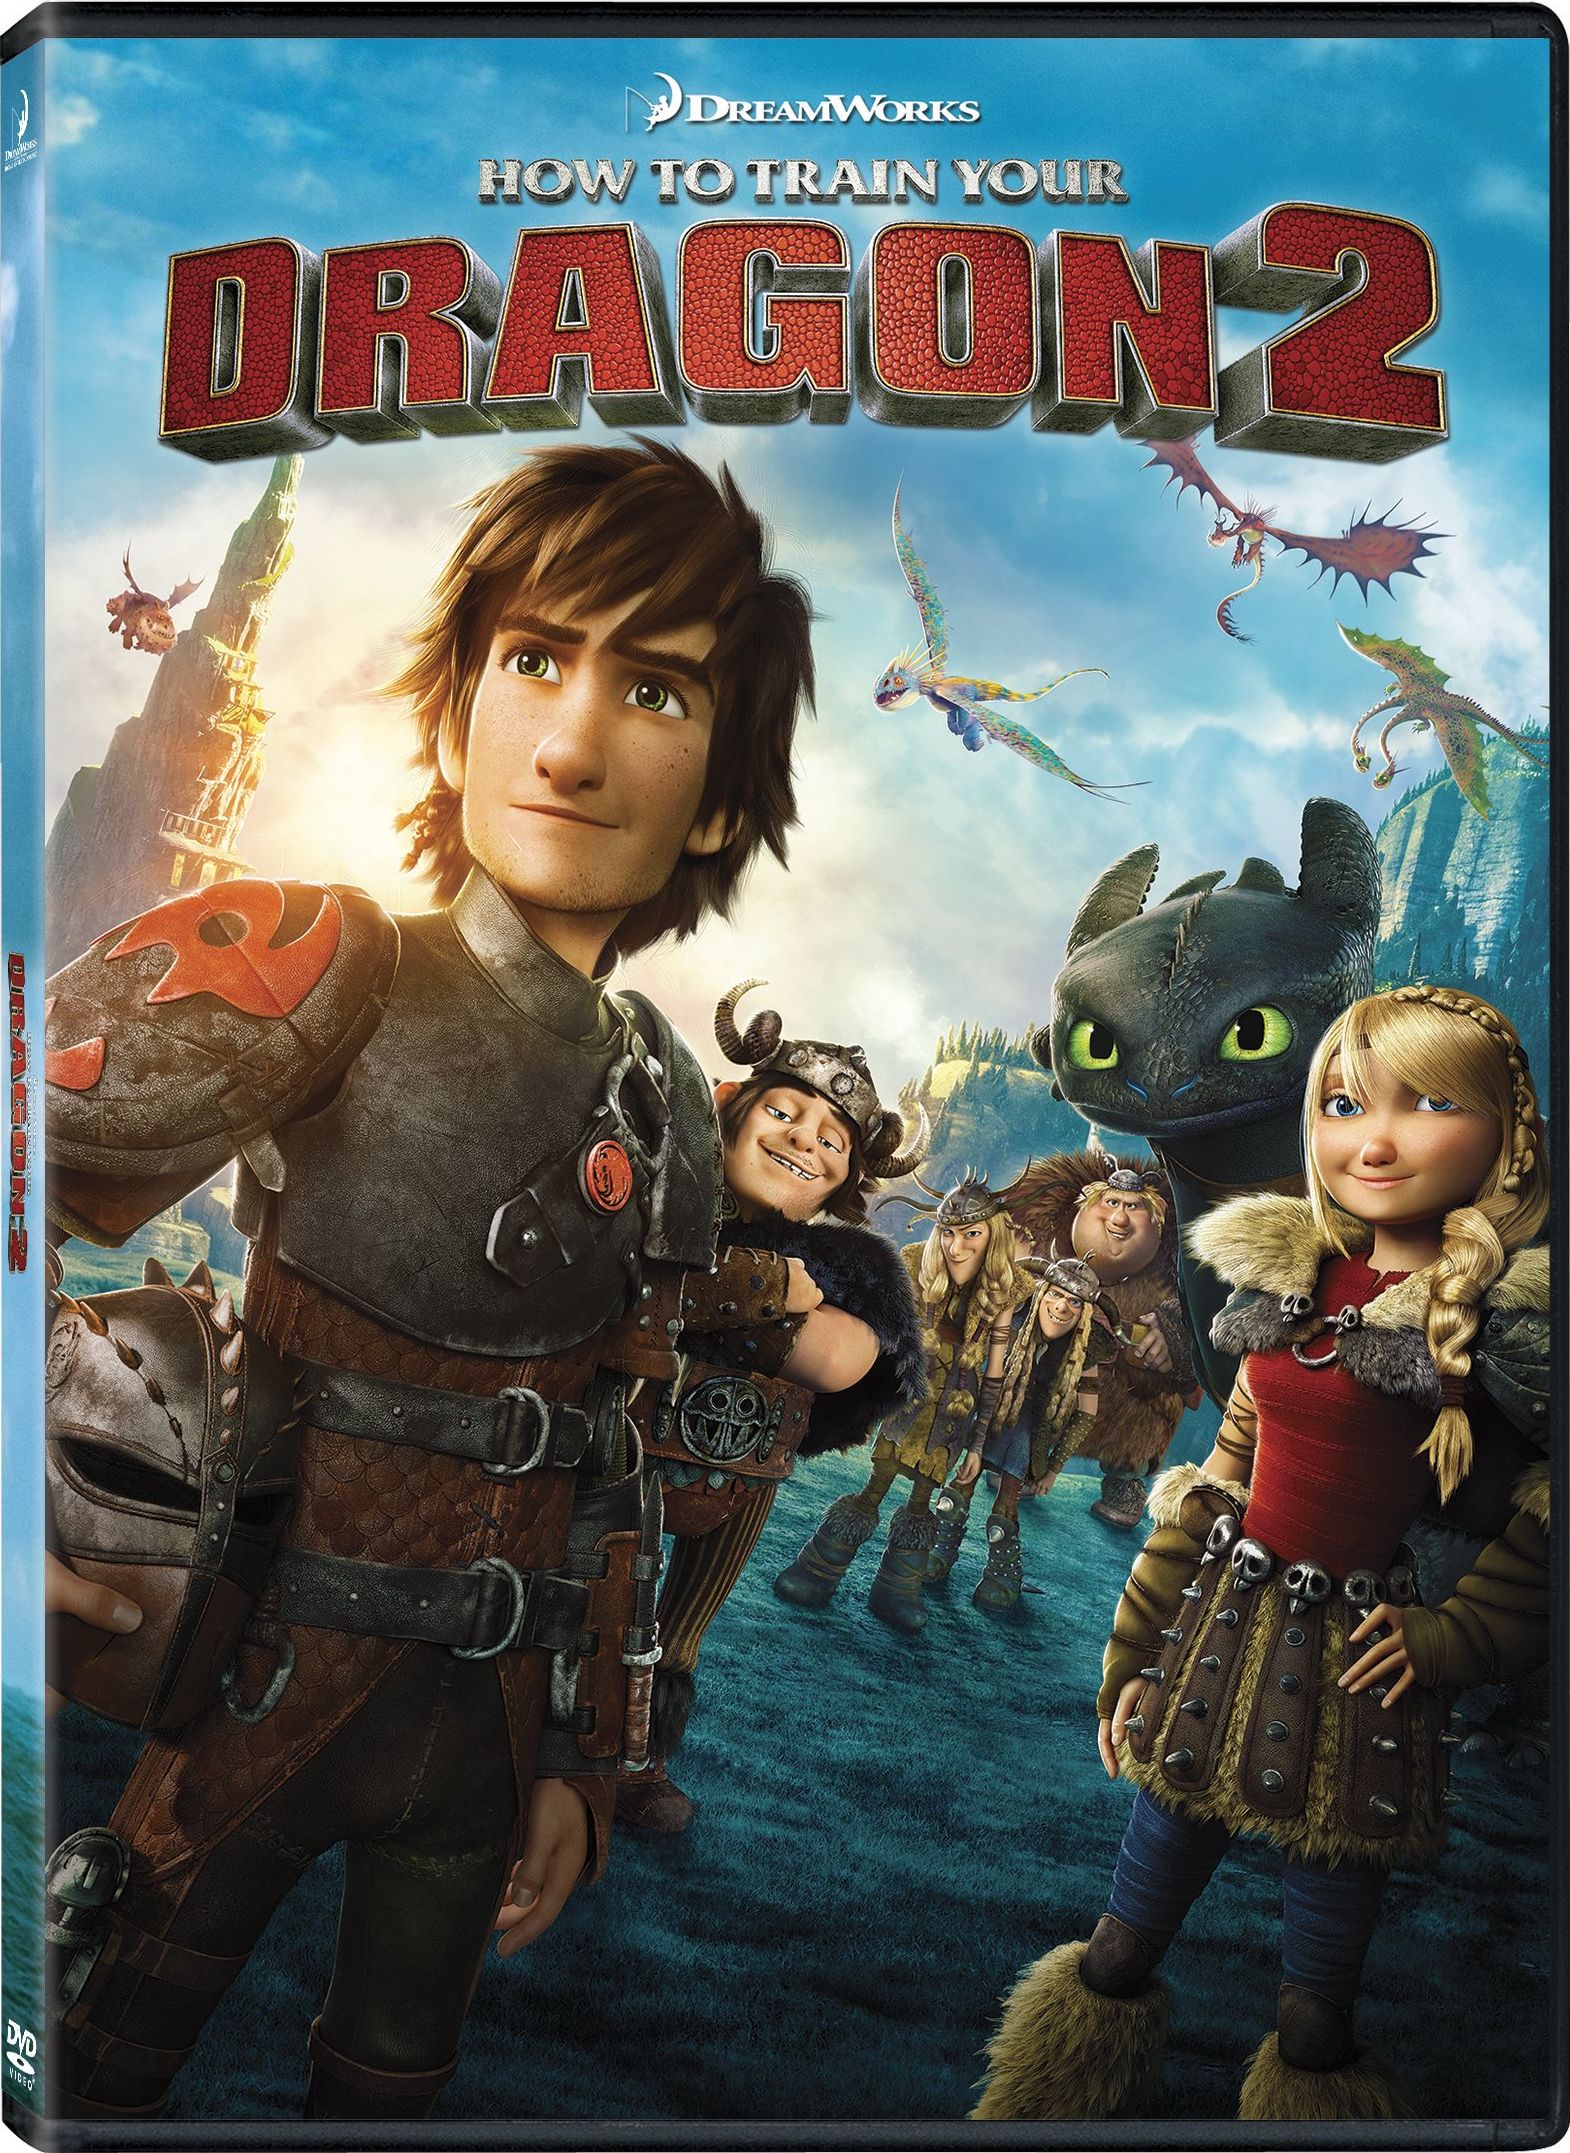 How to Train Your Dragon 11 DVD Release Date November 11, 11014